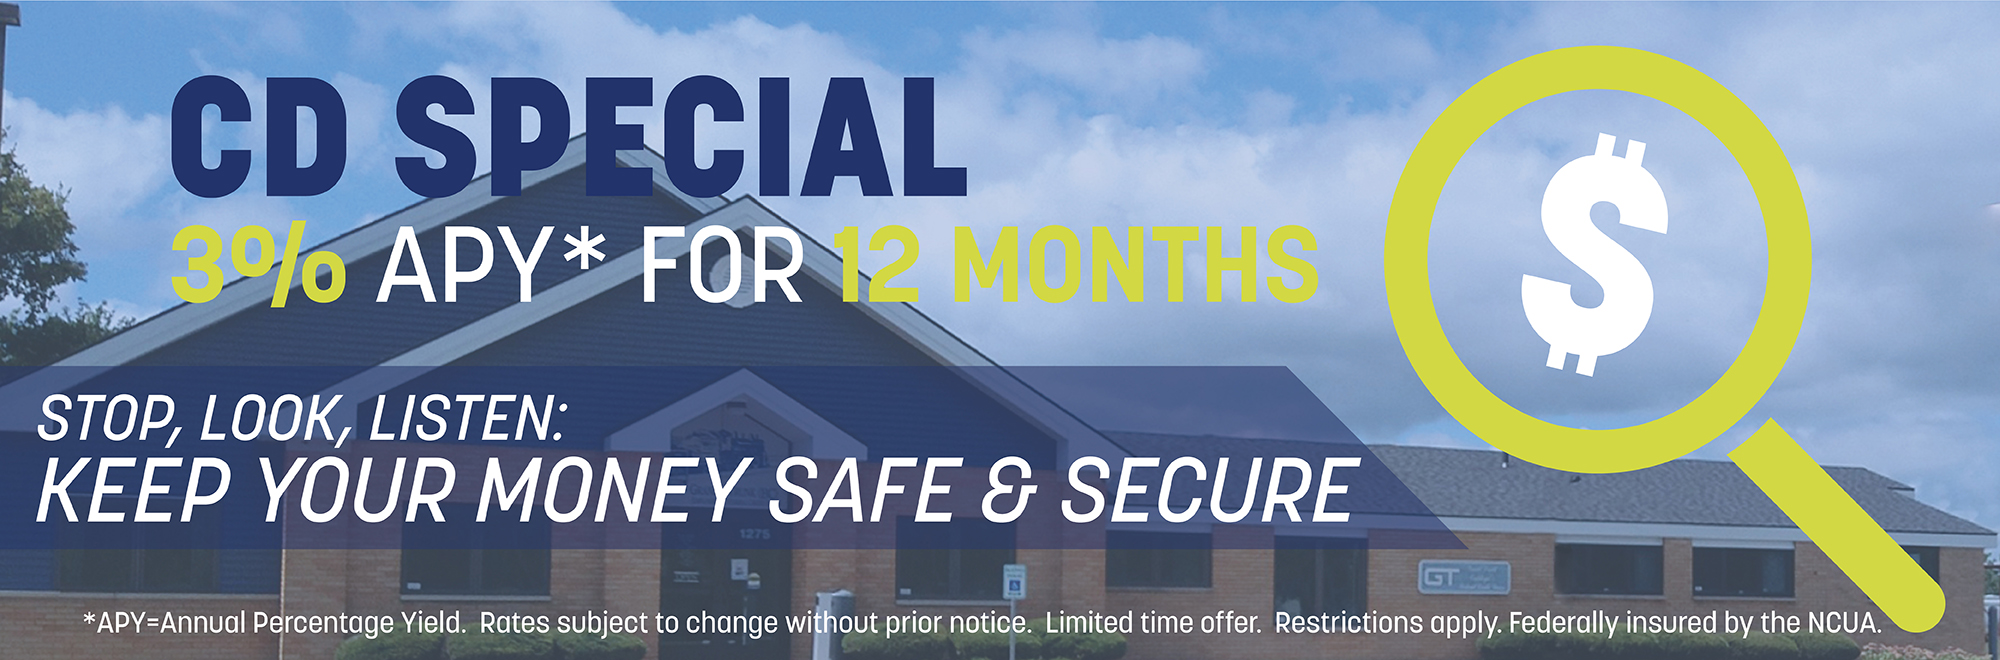 CD Special 3% APY* for 12 months Stop, Look, Listen: Keep your money safe and secure